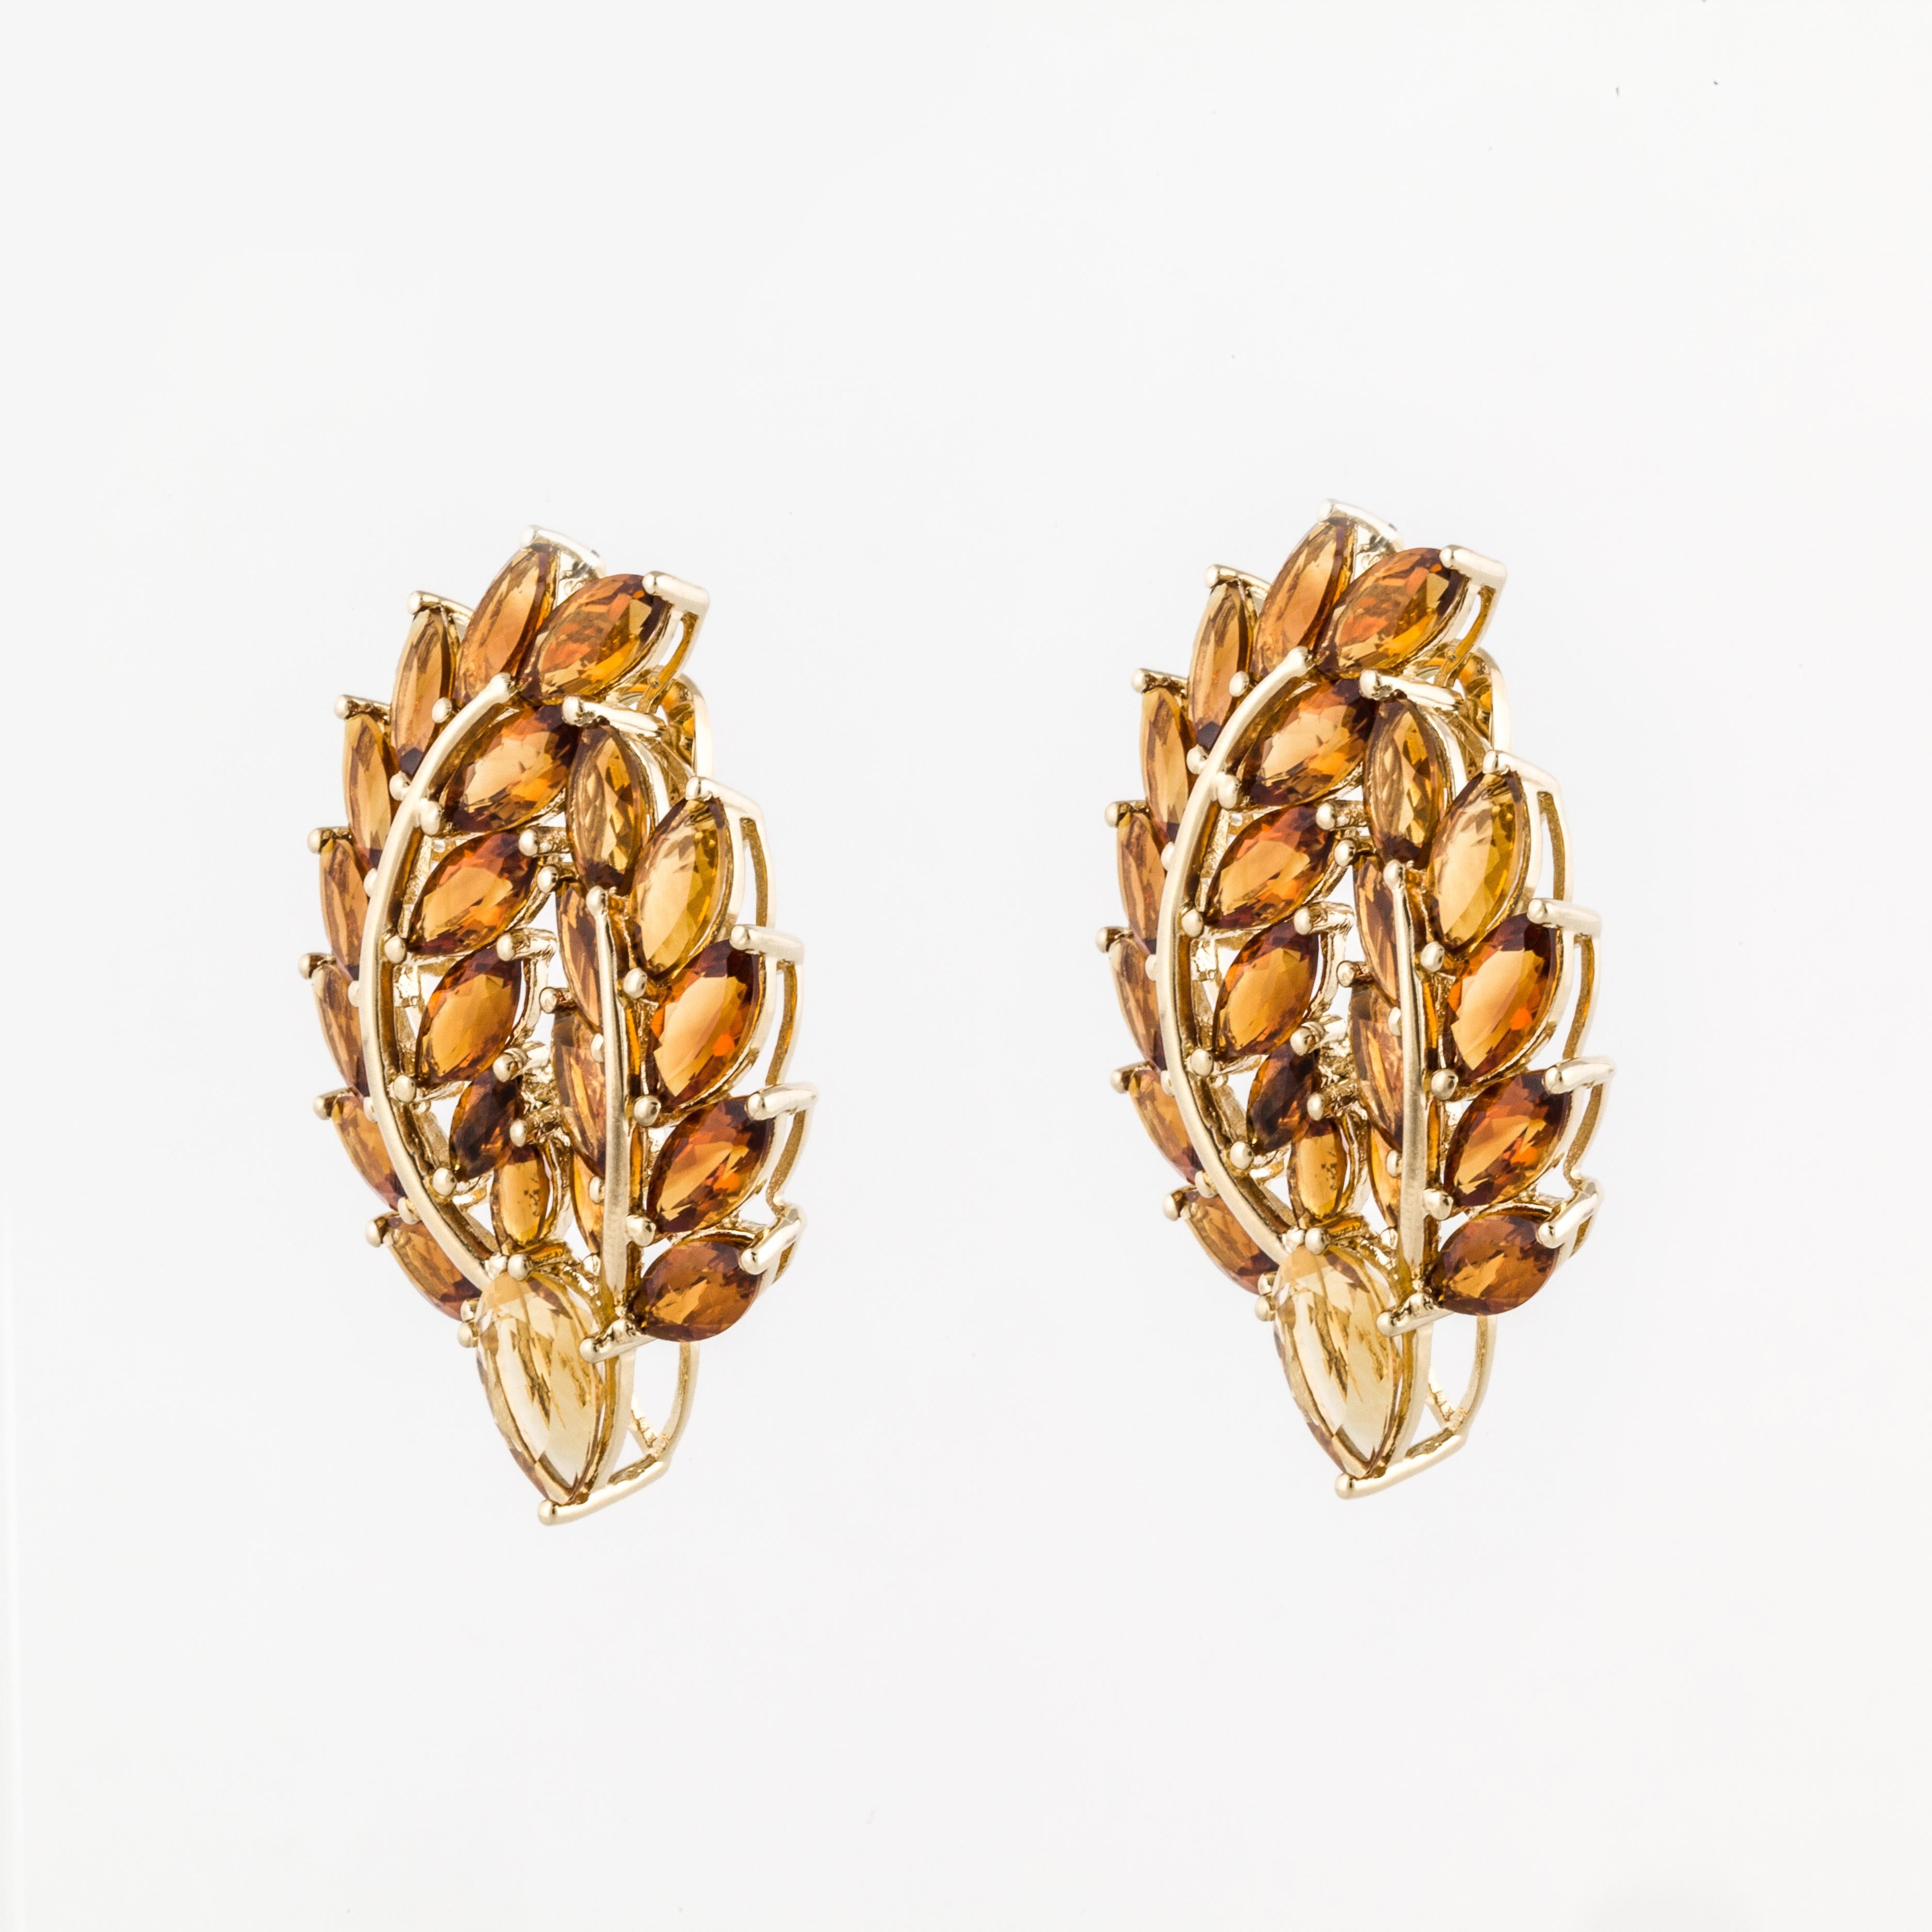 18K yellow gold cluster citrine earrings in a leaf motif.  There are forty-two marquise shaped citrines and two pear shaped citrines totaling 21 carats.  The earrings measure 1 1/2 inches long and 1 1/8 inches wide.  Clip style earrings.  